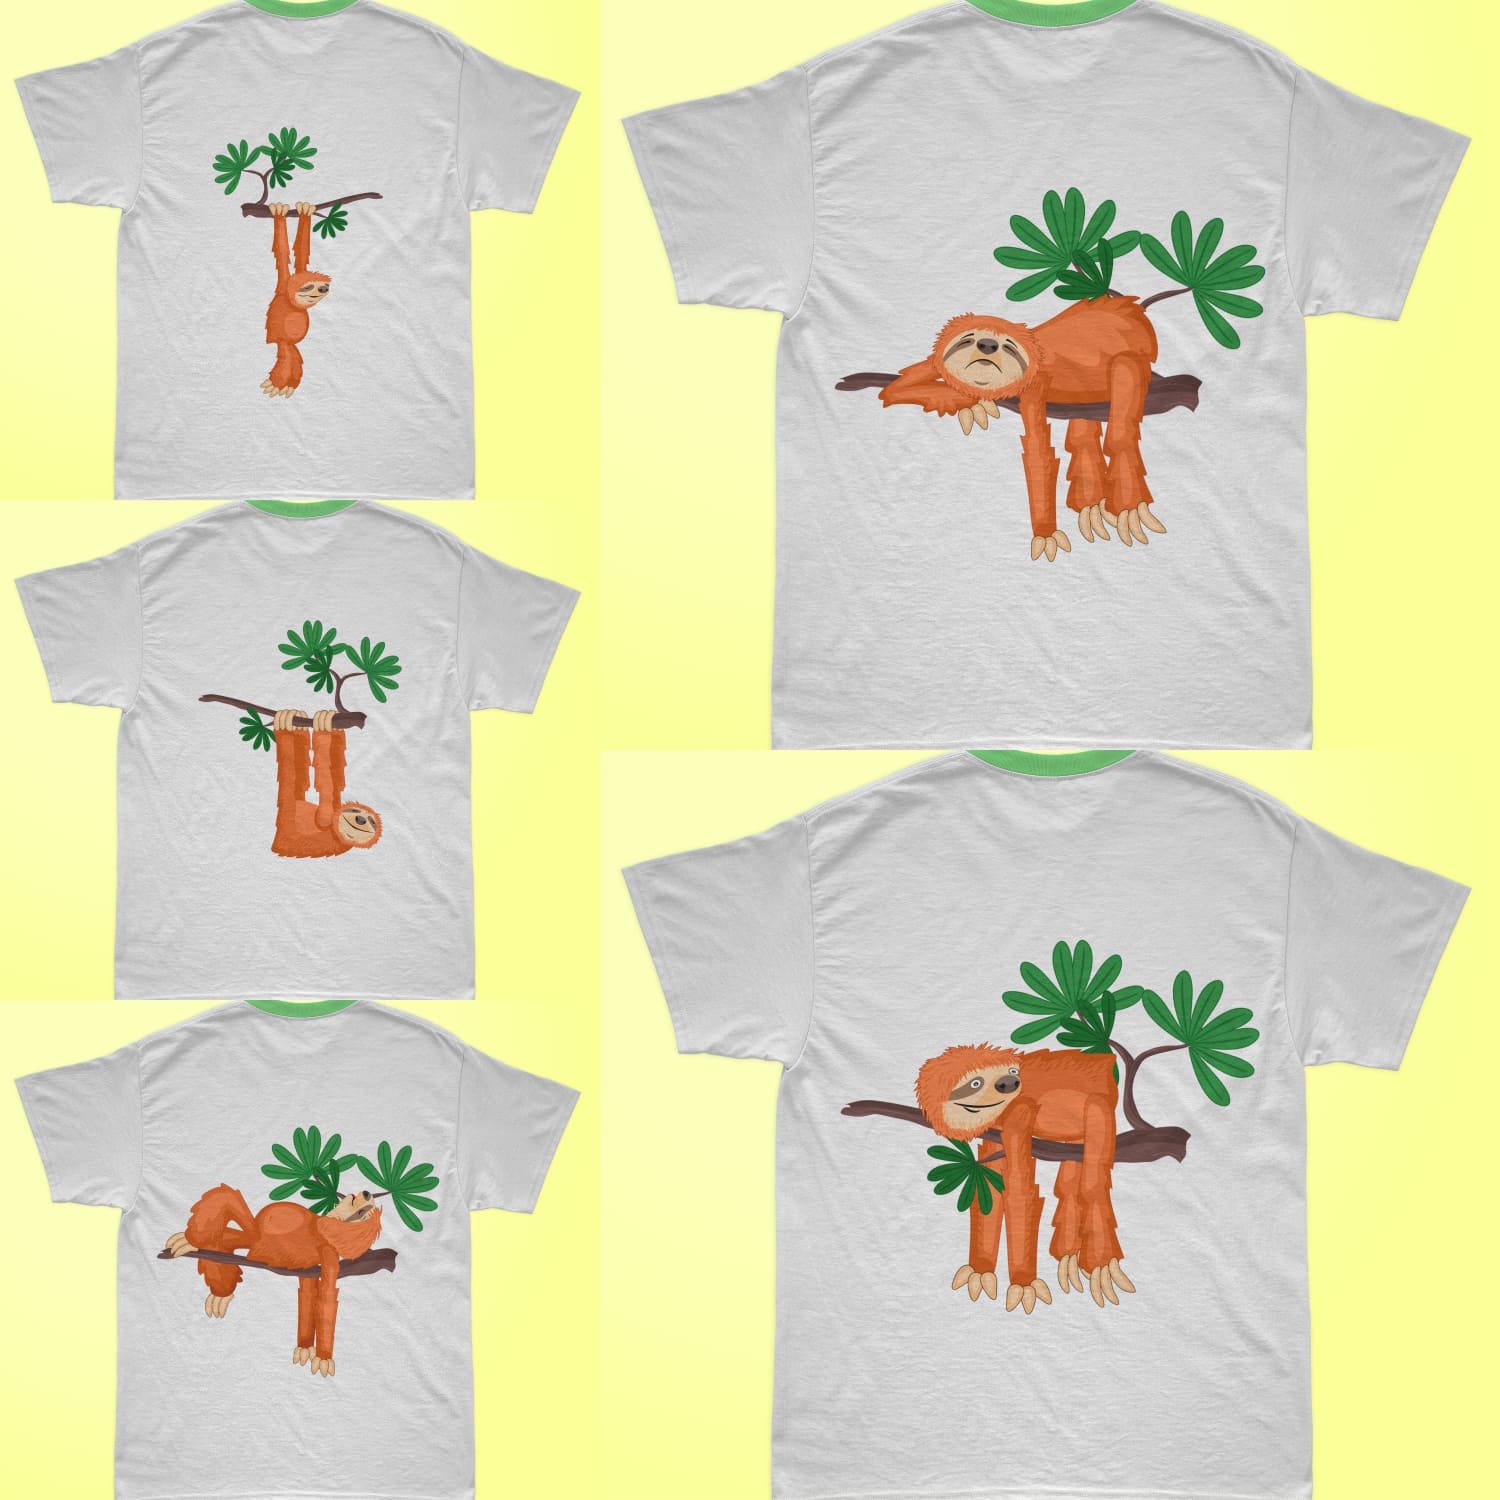 Bundle of T-shirts with colorful sloth print on wood.